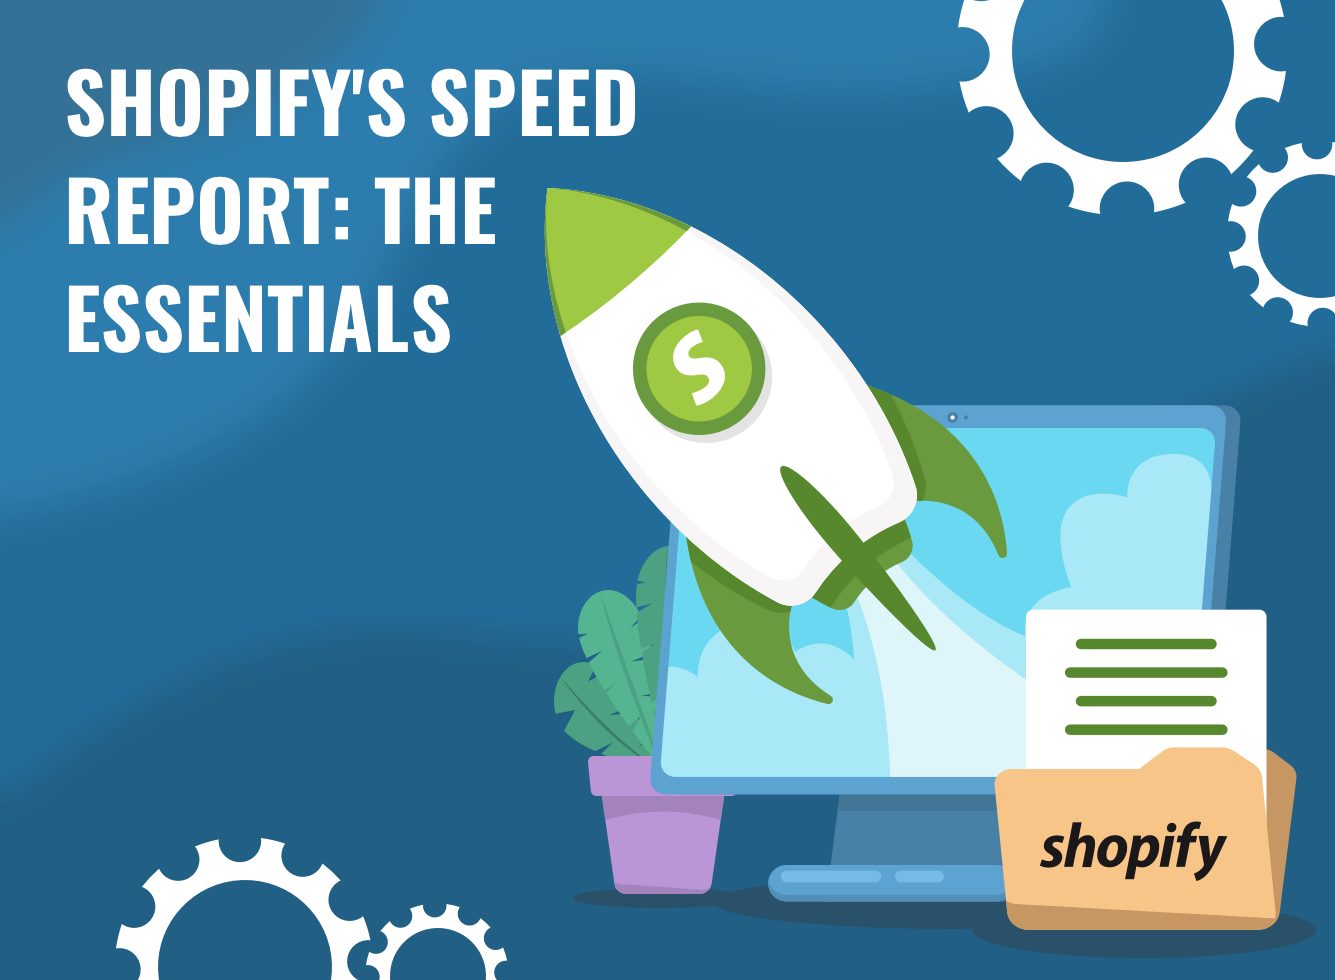 Shopify’s Speed Report: The Essentials